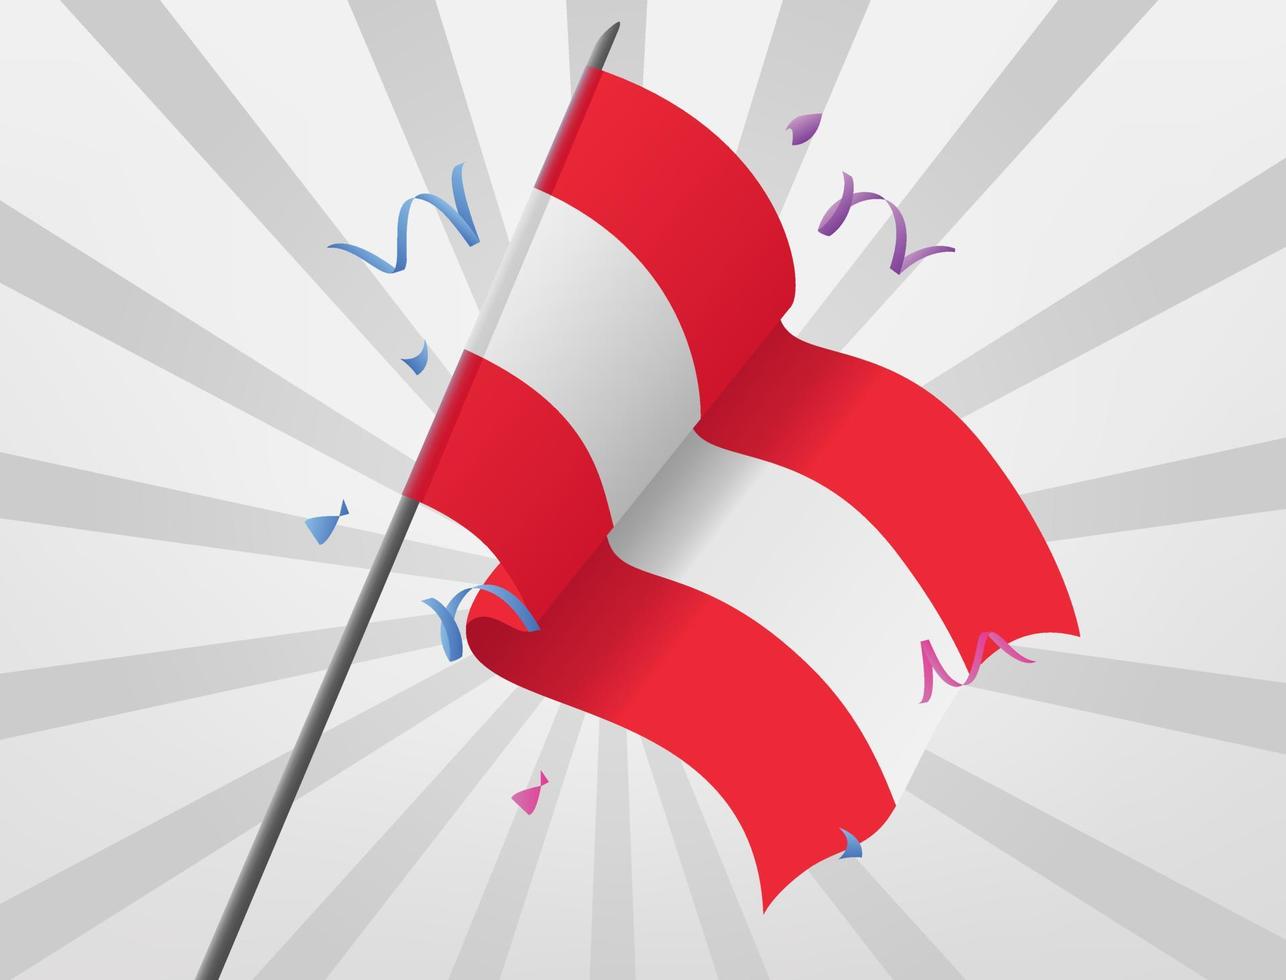 The Austrian celebrations flag flew at a height vector